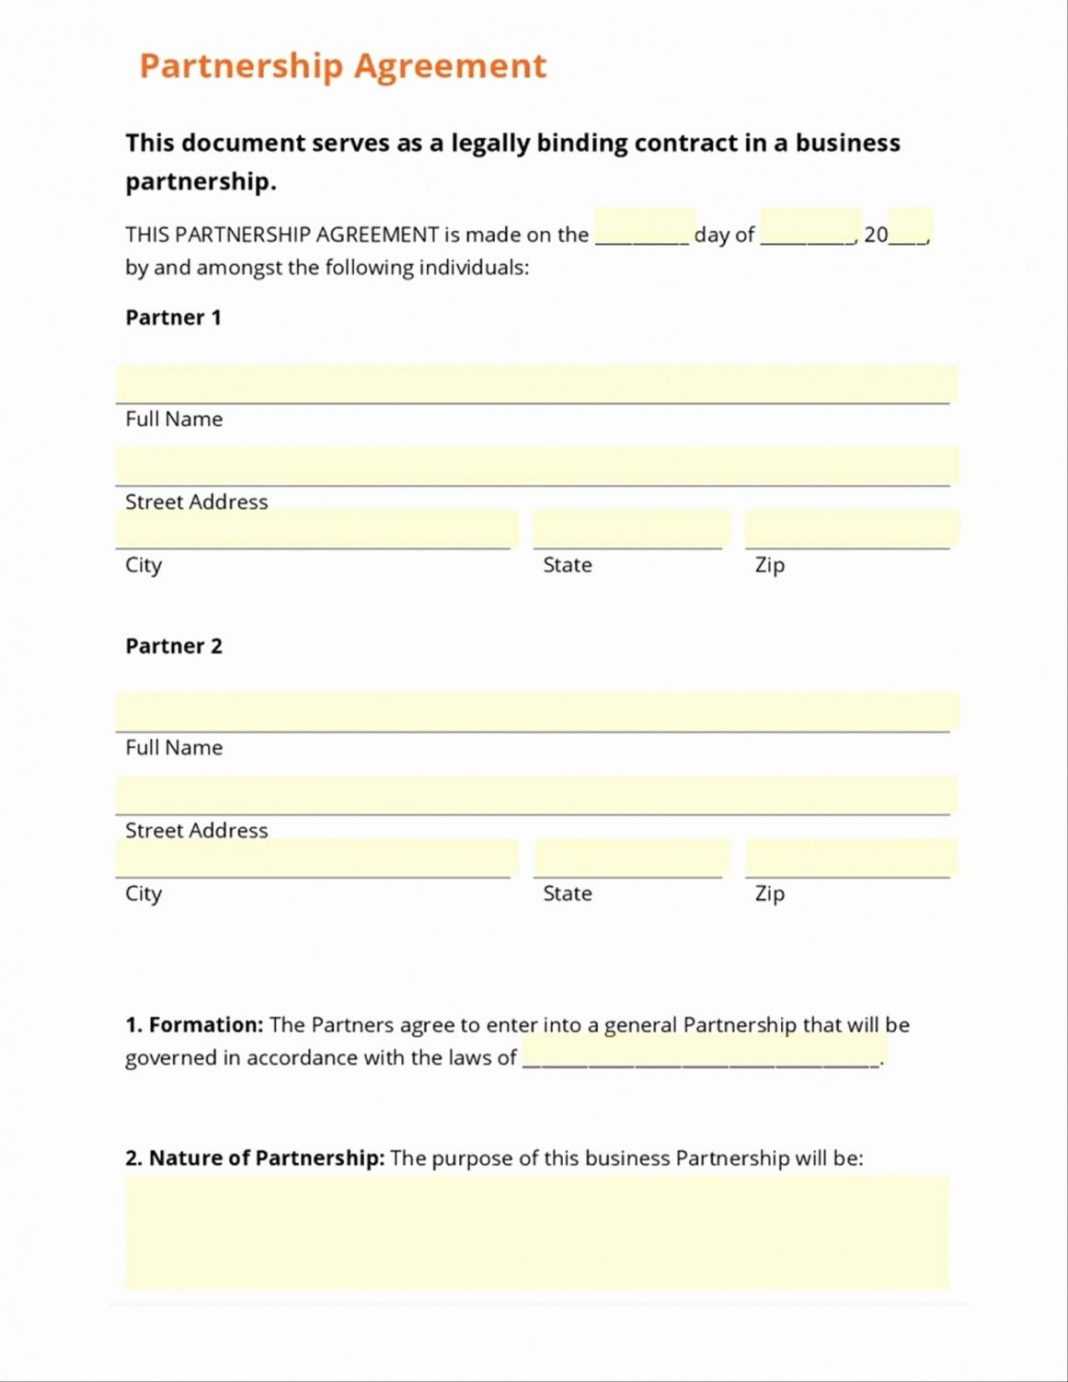 Partnership Agreement Checklist Joint Tenancy Template Free In Free Business Partnership Agreement Template Uk